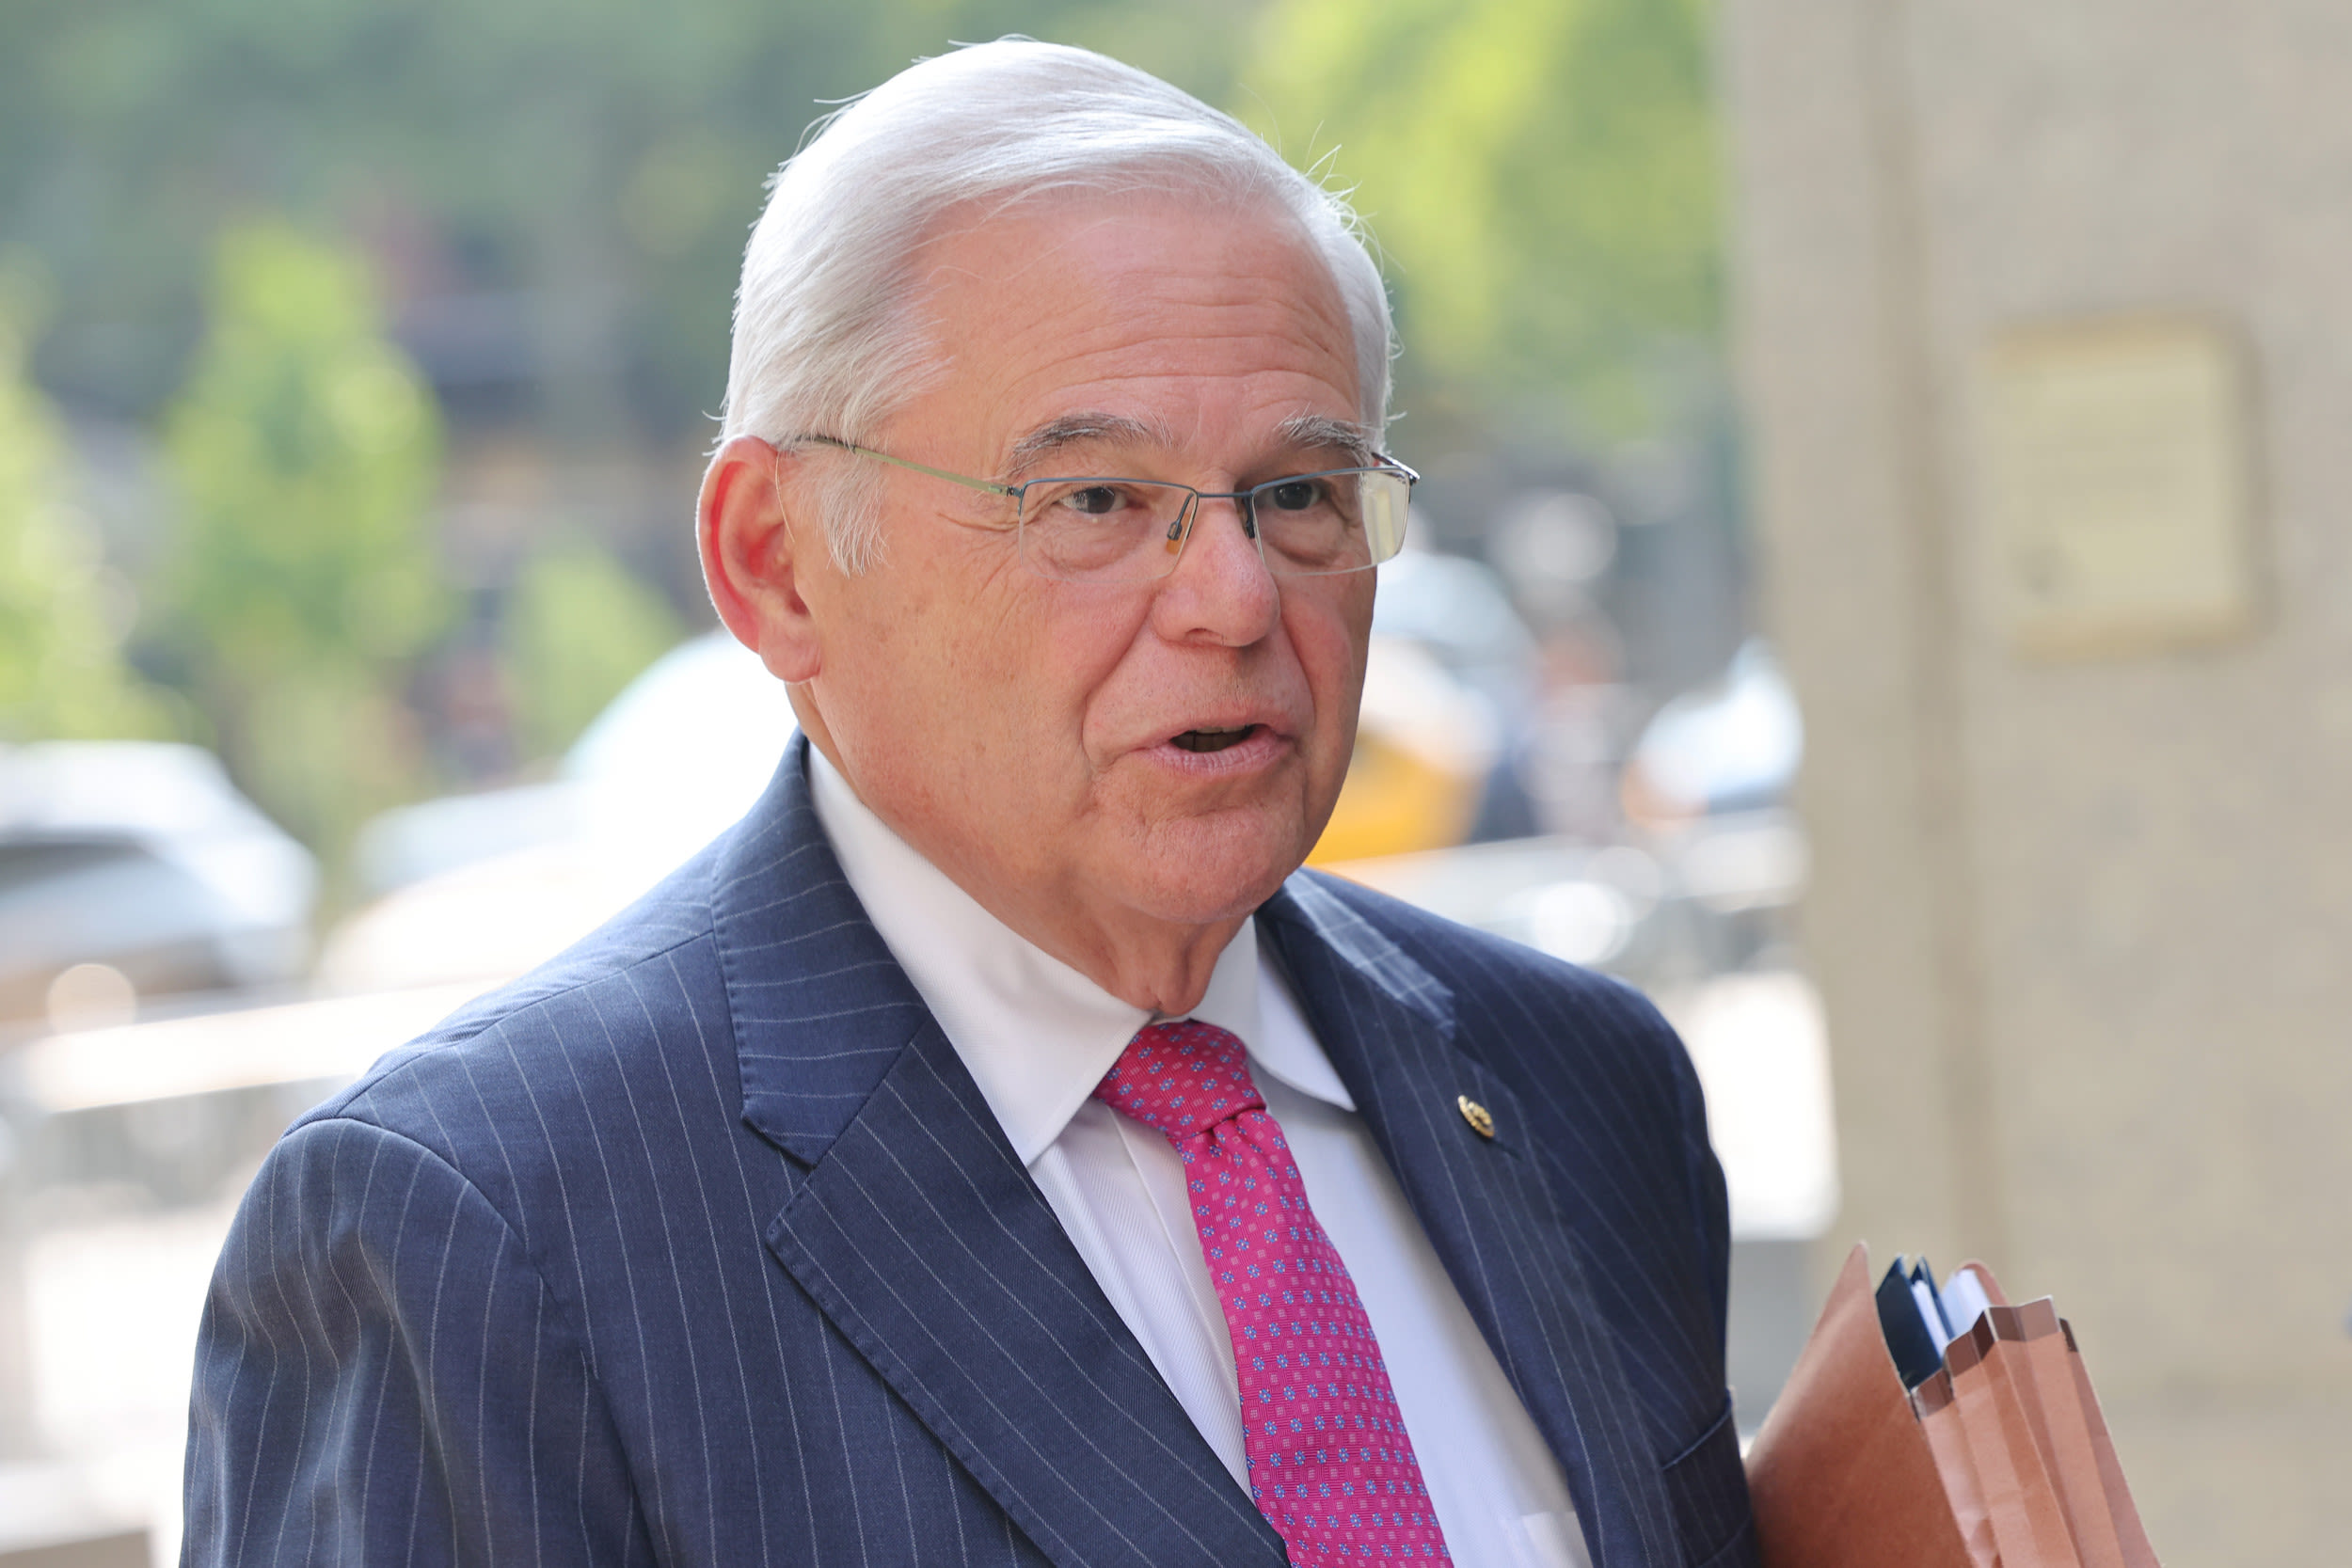 Bob Menendez corruption trial: Closing arguments drag on for another day